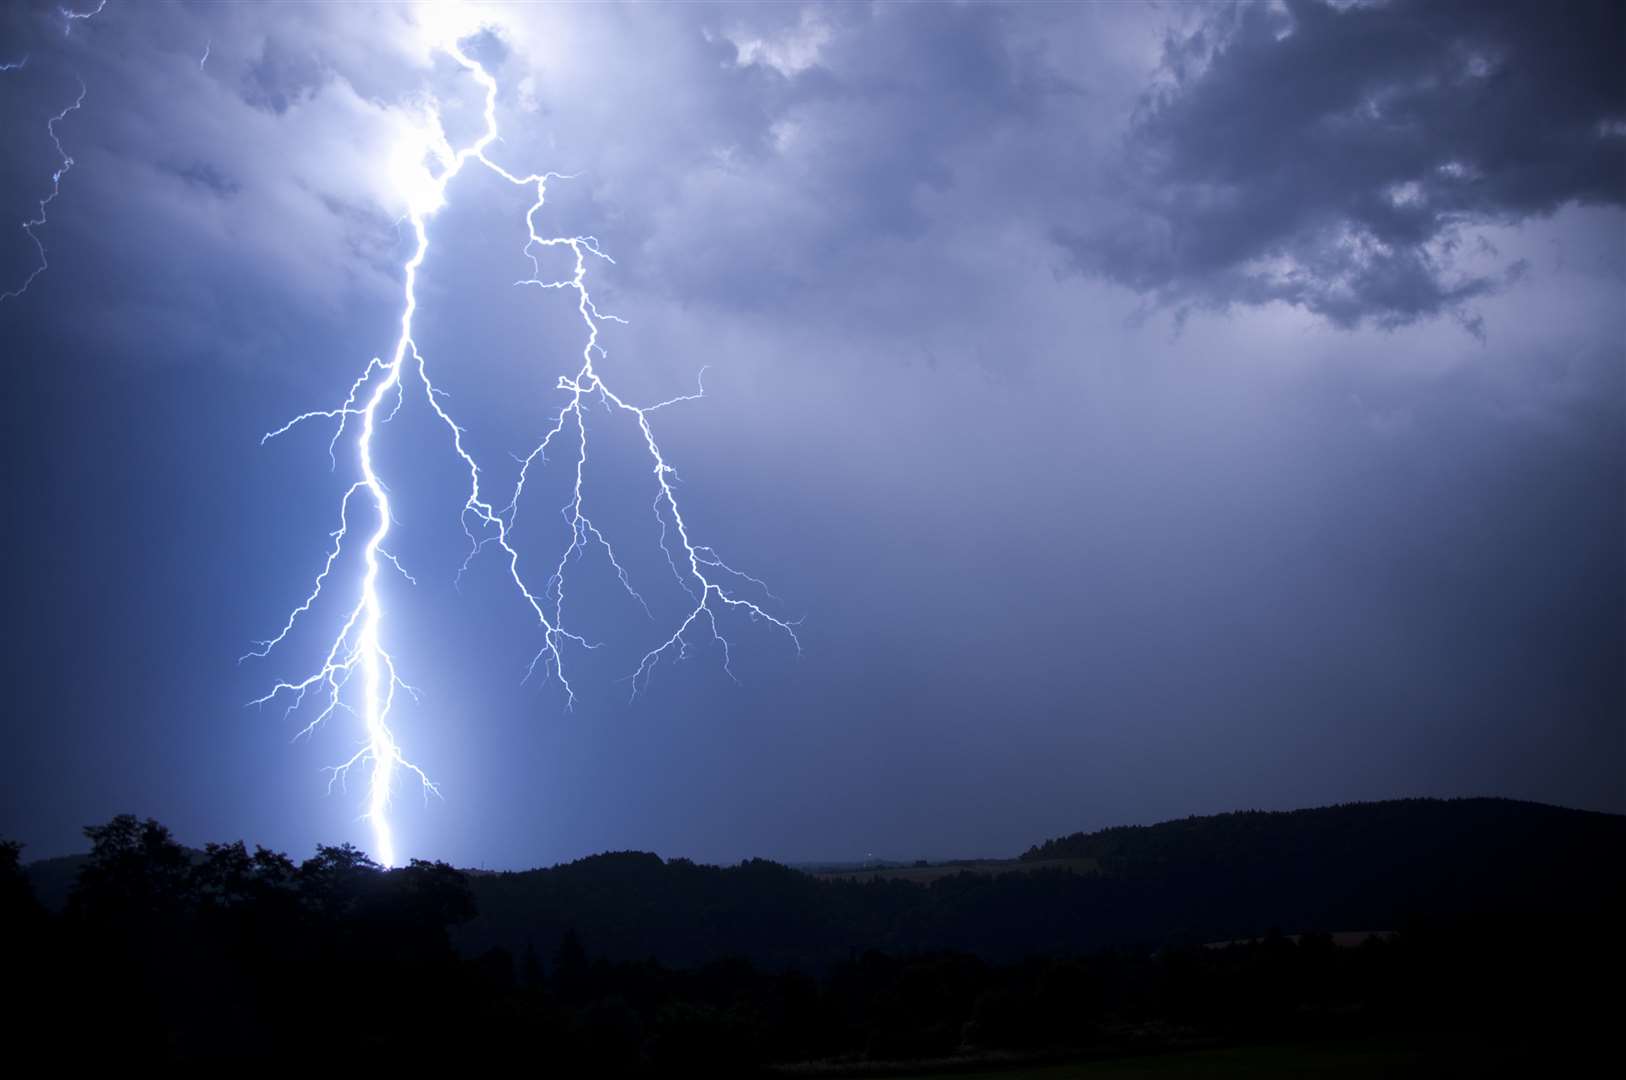 Thunderstorms could hit the Highlands on Sunday afternoon.